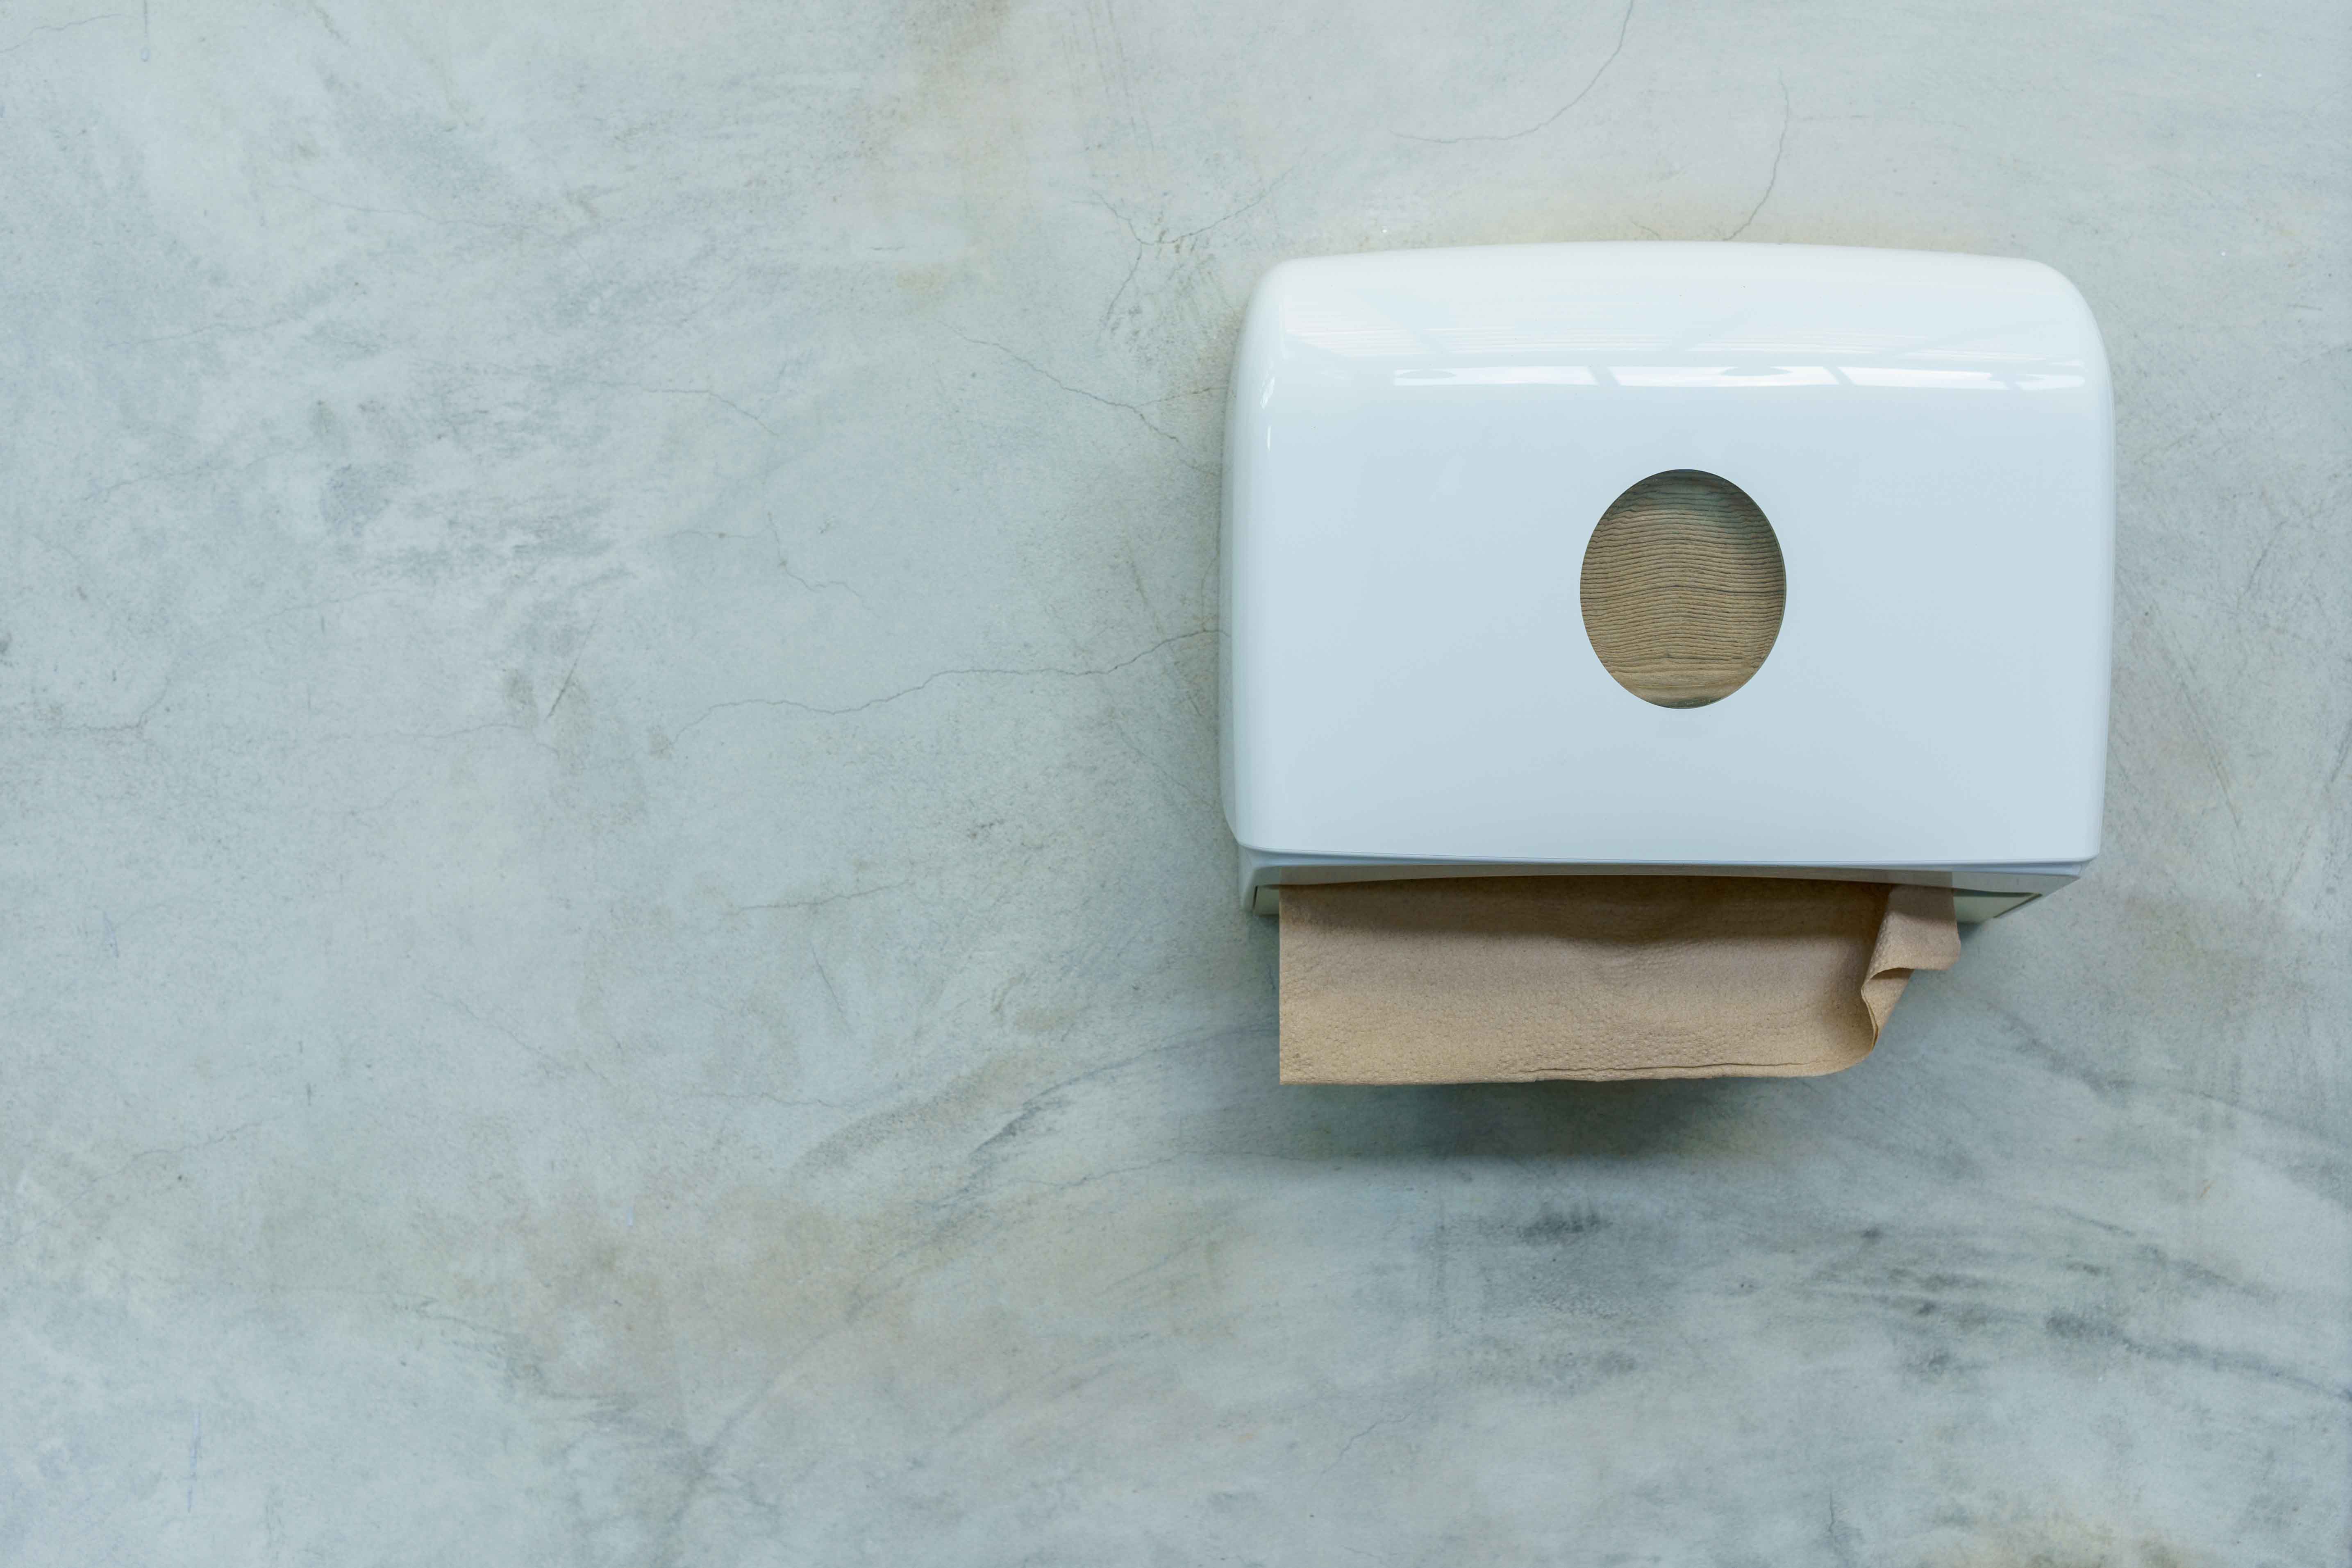 Hand Drying with Paper Towels Spreads Fewer Microbes than Other Methods